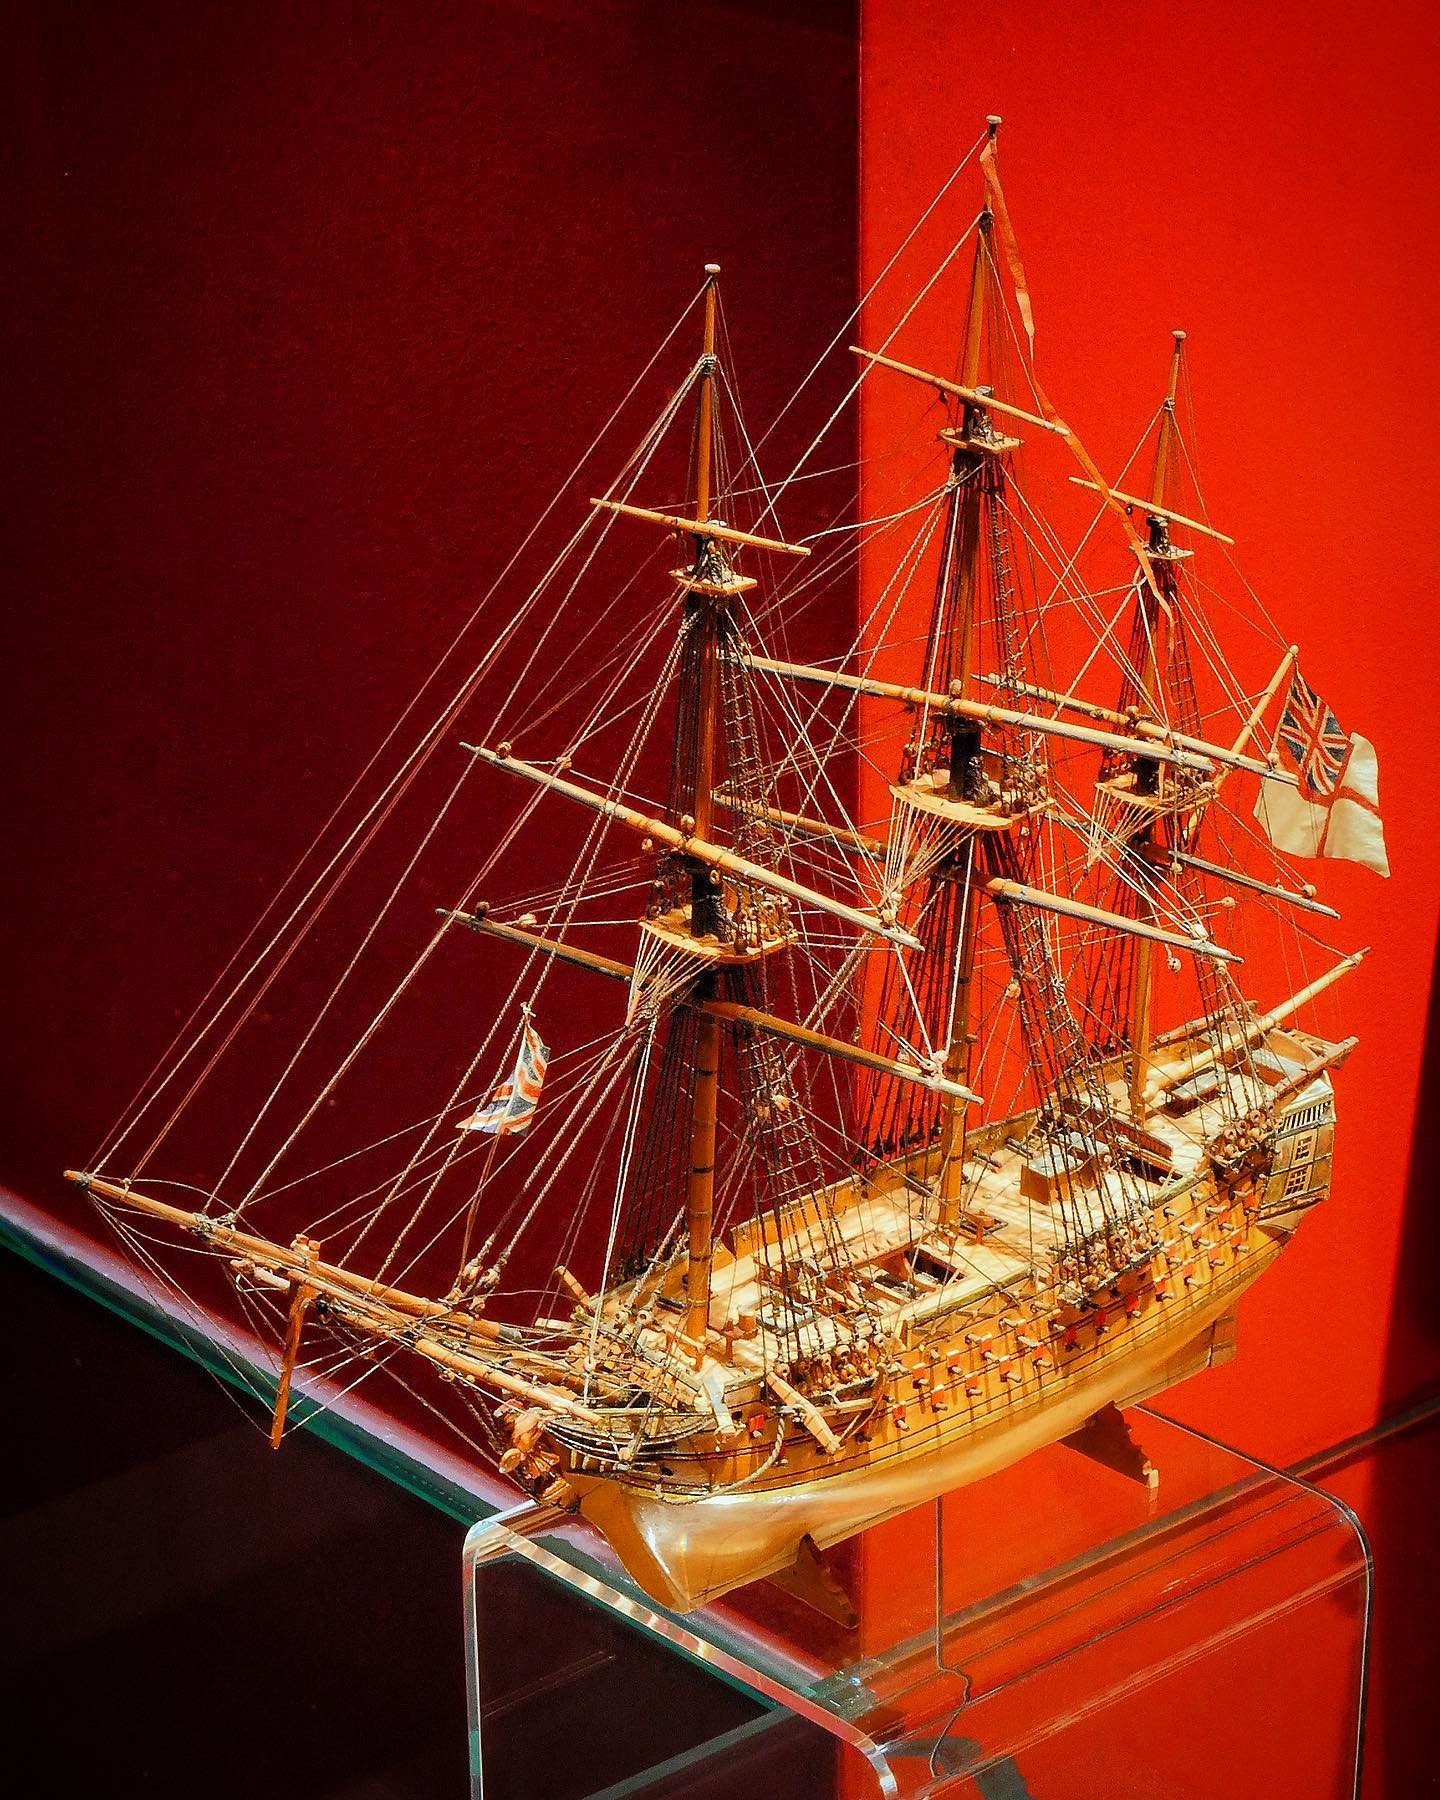 POW wooden ship model. This delicate miniature is under 30 cm long and stands with other specially valuables objects in the Treasure Chamber of the museum, on deck 8.